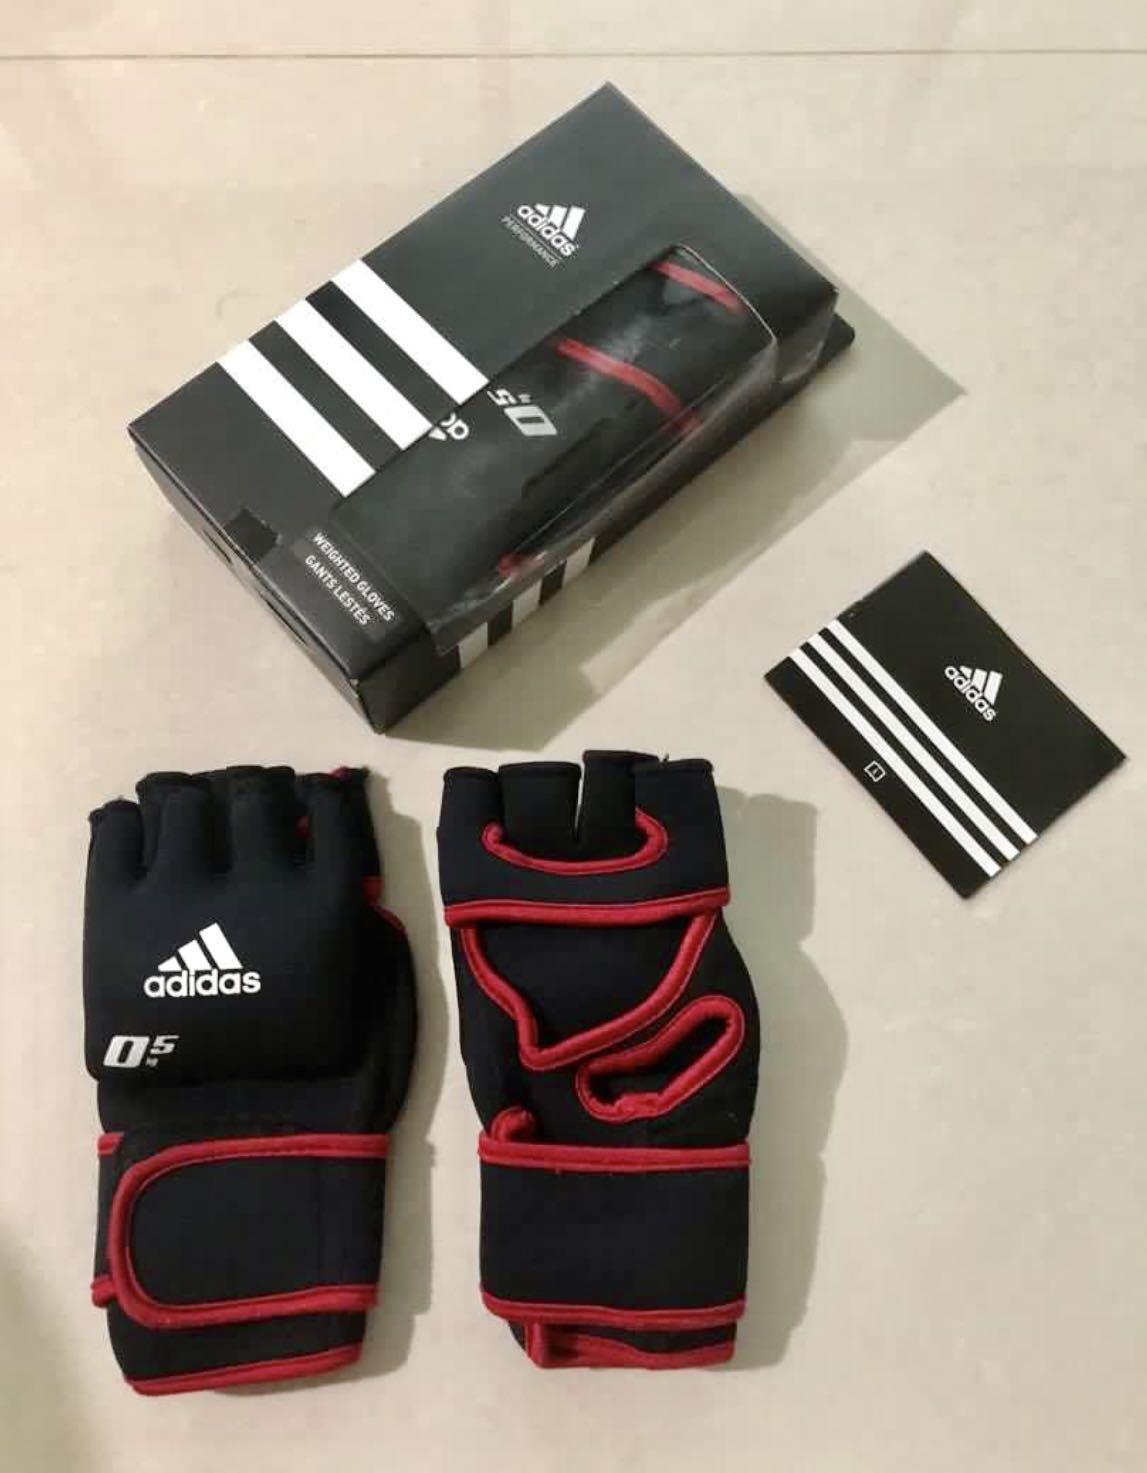 Weighted Gloves 2 x 0.5kgs Adidas, Sports Equipment, Exercise Fitness, Toning Stretching on